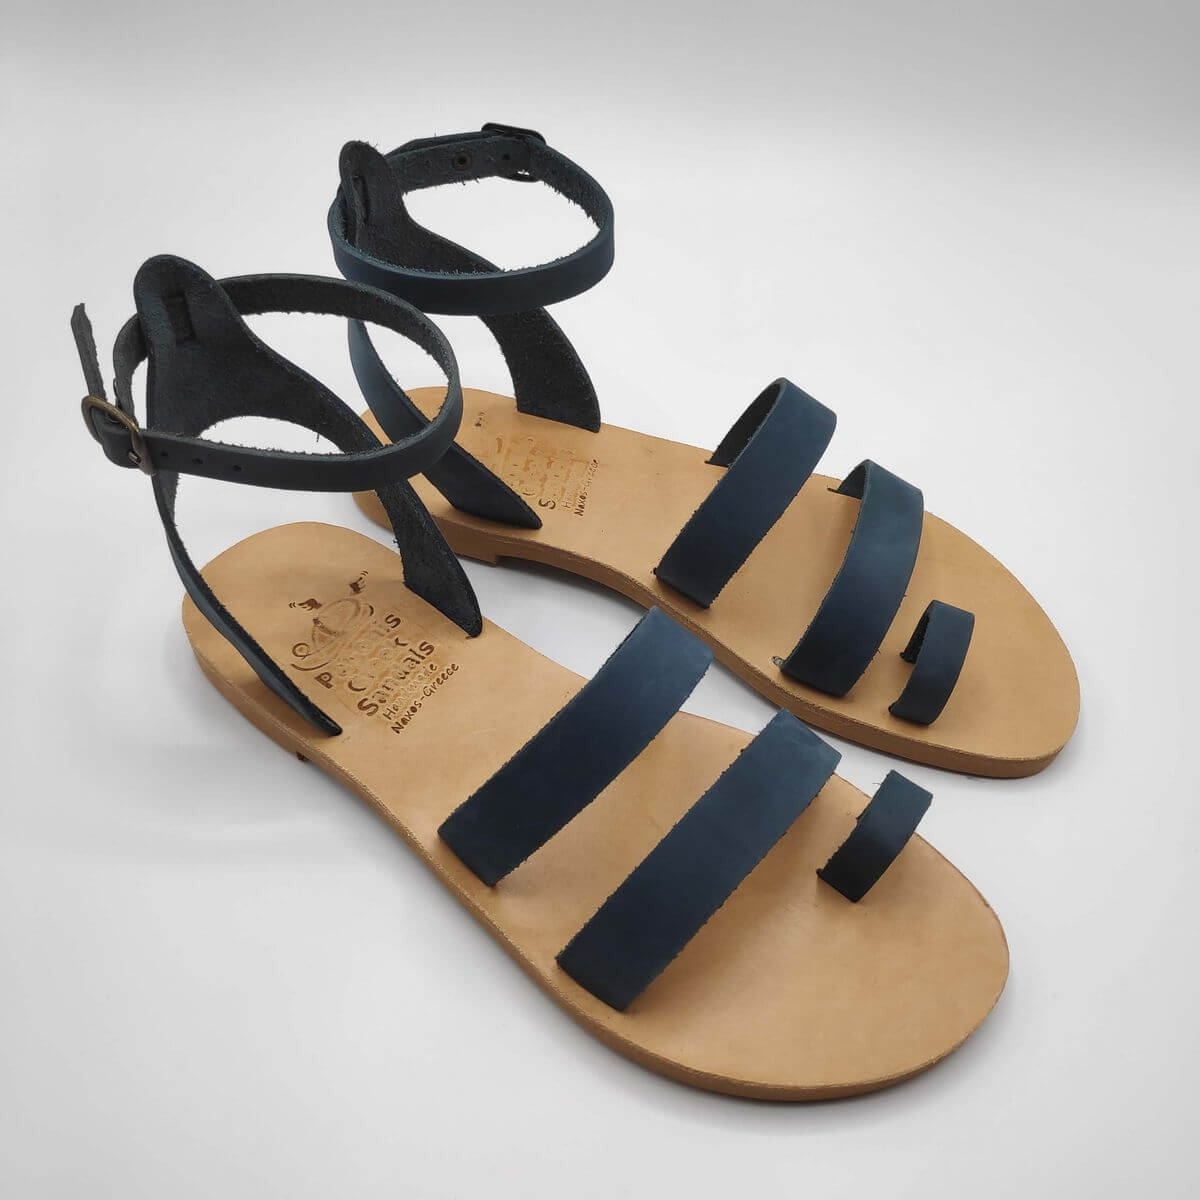 blue nubuck leather dressy sandals with two straps, toe ring and high ankle strap, side view